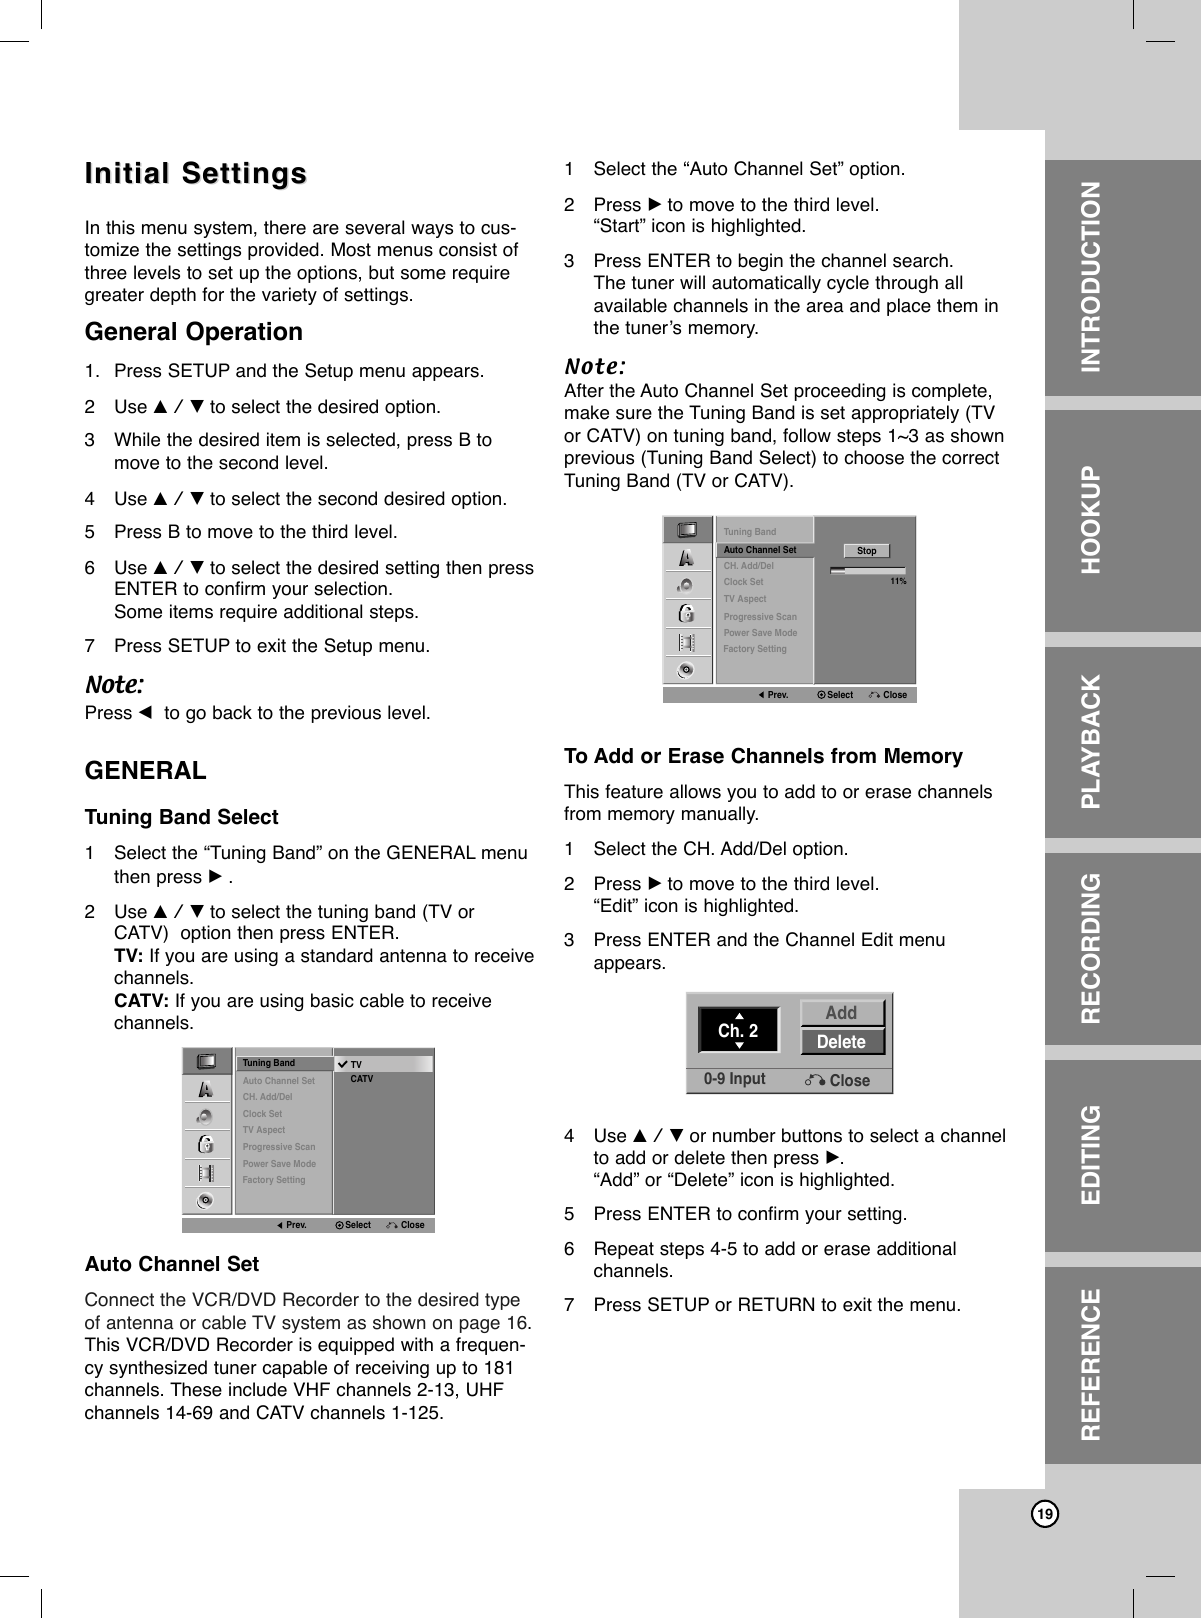 19Initial SettingsInitial SettingsIn this menu system, there are several ways to cus-tomize the settings provided. Most menus consist ofthree levels to set up the options, but some requiregreater depth for the variety of settings.General Operation1. Press SETUP and the Setup menu appears. 2Use v / V to select the desired option.3While the desired item is selected, press B tomove to the second level.4Use v / V to select the second desired option.5Press B to move to the third level.6Use v / V to select the desired setting then pressENTER to confirm your selection.Some items require additional steps.7Press SETUP to exit the Setup menu.Note:Press bto go back to the previous level.GENERALTuning Band Select1Select the “Tuning Band” on the GENERAL menuthen press B.2Use v / V to select the tuning band (TV orCATV)  option then press ENTER.TV: If you are using a standard antenna to receivechannels. CATV: If you are using basic cable to receivechannels.Auto Channel SetConnect the VCR/DVD Recorder to the desired typeof antenna or cable TV system as shown on page 16.This VCR/DVD Recorder is equipped with a frequen-cy synthesized tuner capable of receiving up to 181channels. These include VHF channels 2-13, UHFchannels 14-69 and CATV channels 1-125. 1Select the “Auto Channel Set” option.2Press Bto move to the third level.“Start” icon is highlighted.3Press ENTER to begin the channel search.The tuner will automatically cycle through all available channels in the area and place them inthe tuner’s memory.Note:After the Auto Channel Set proceeding is complete,make sure the Tuning Band is set appropriately (TVor CATV) on tuning band, follow steps 1~3 as shownprevious (Tuning Band Select) to choose the correctTuning Band (TV or CATV).To Add or Erase Channels from MemoryThis feature allows you to add to or erase channelsfrom memory manually.1Select the CH. Add/Del option.2Press Bto move to the third level.“Edit” icon is highlighted.3Press ENTER and the Channel Edit menuappears.4Use v / V or number buttons to select a channelto add or delete then press B.“Add” or “Delete” icon is highlighted.5Press ENTER to confirm your setting.6Repeat steps 4-5 to add or erase additional channels.7Press SETUP or RETURN to exit the menu.INTRODUCTIONHOOKUPPLAYBACKRECORDINGEDITINGREFERENCETuning BandAuto Channel SetCH. Add/DelClock SetTV AspectProgressive ScanPower Save ModeTVCATVPrev. Select CloseFactory SettingTuning BandAuto Channel SetCH. Add/DelClock SetTV AspectProgressive Scan11%StopPrev. Select ClosePower Save ModeFactory SettingCh. 2 DeleteAdd0-9 Input Close